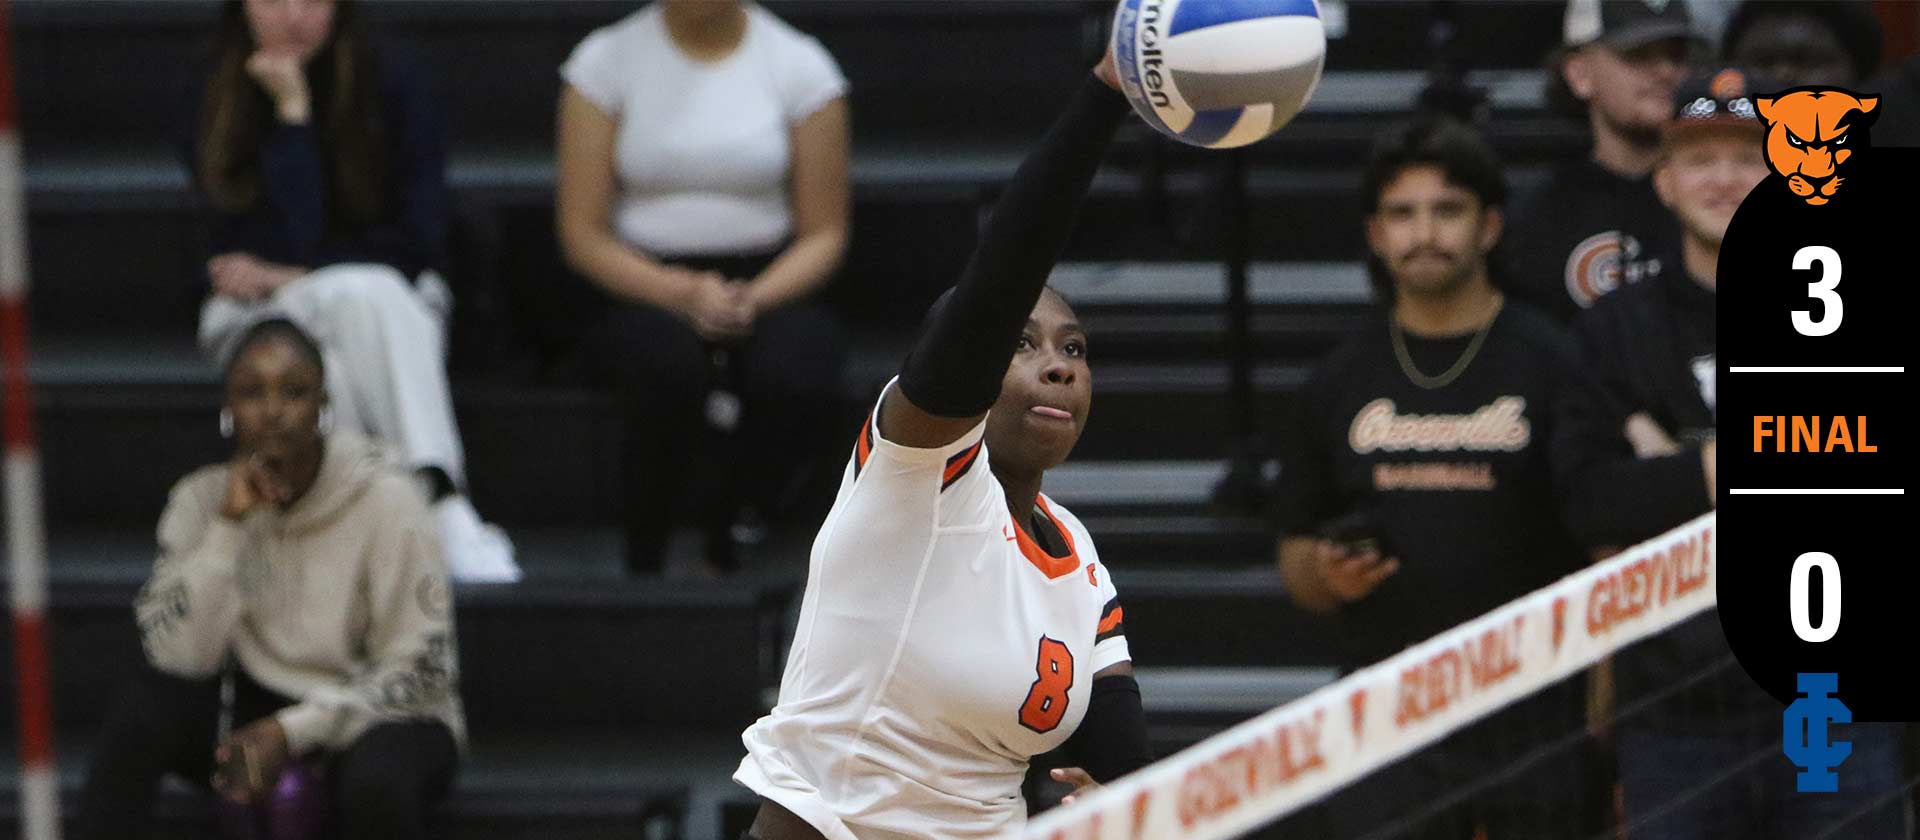 Volleyball adds two more regular season wins